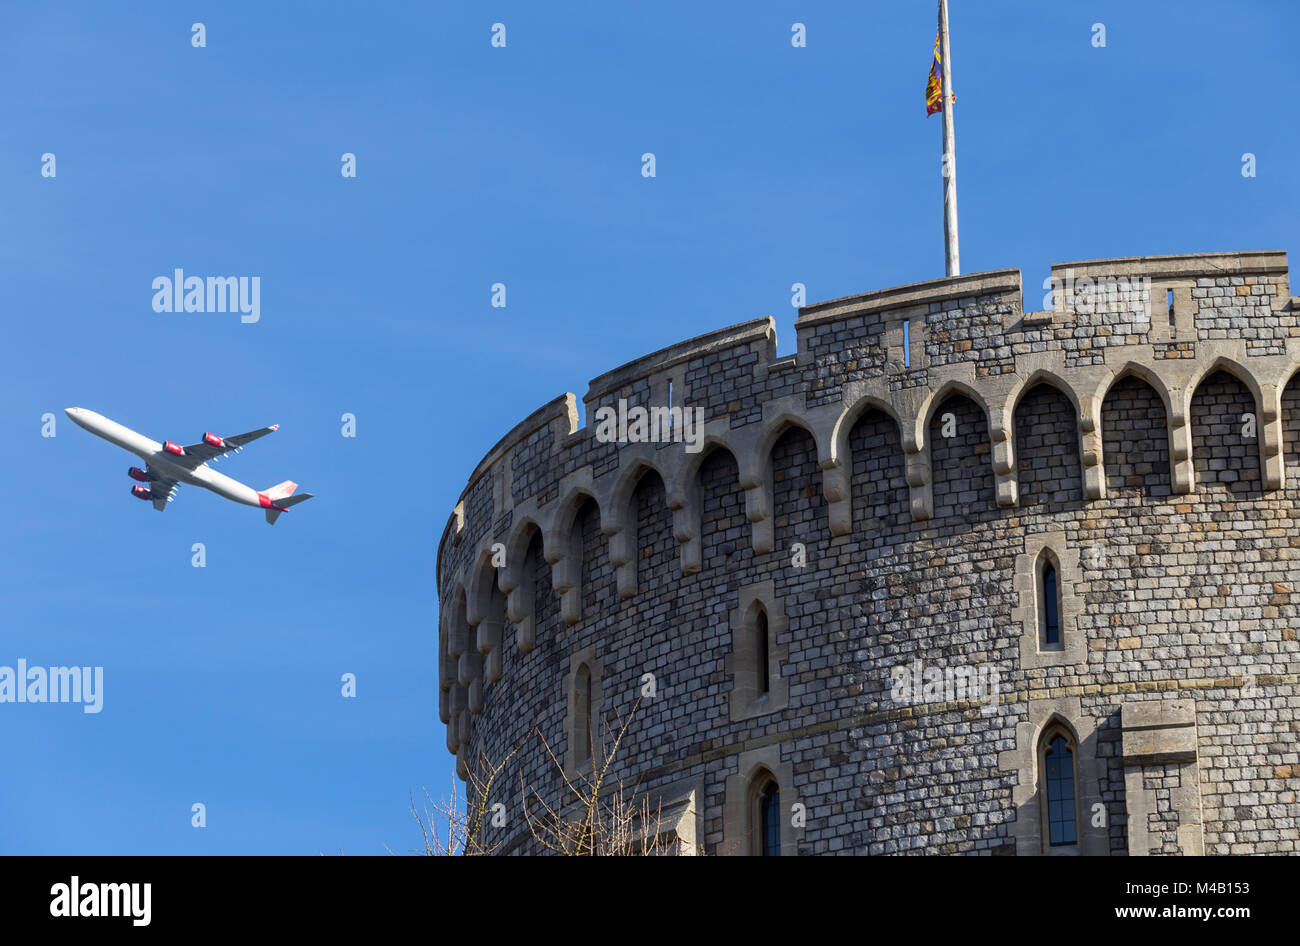 Aircraft / aeroplane / air plane / flight from Heathrow airport over the round tower of Windsor Castle, climbing after take off, & Royal Standard flag Stock Photo